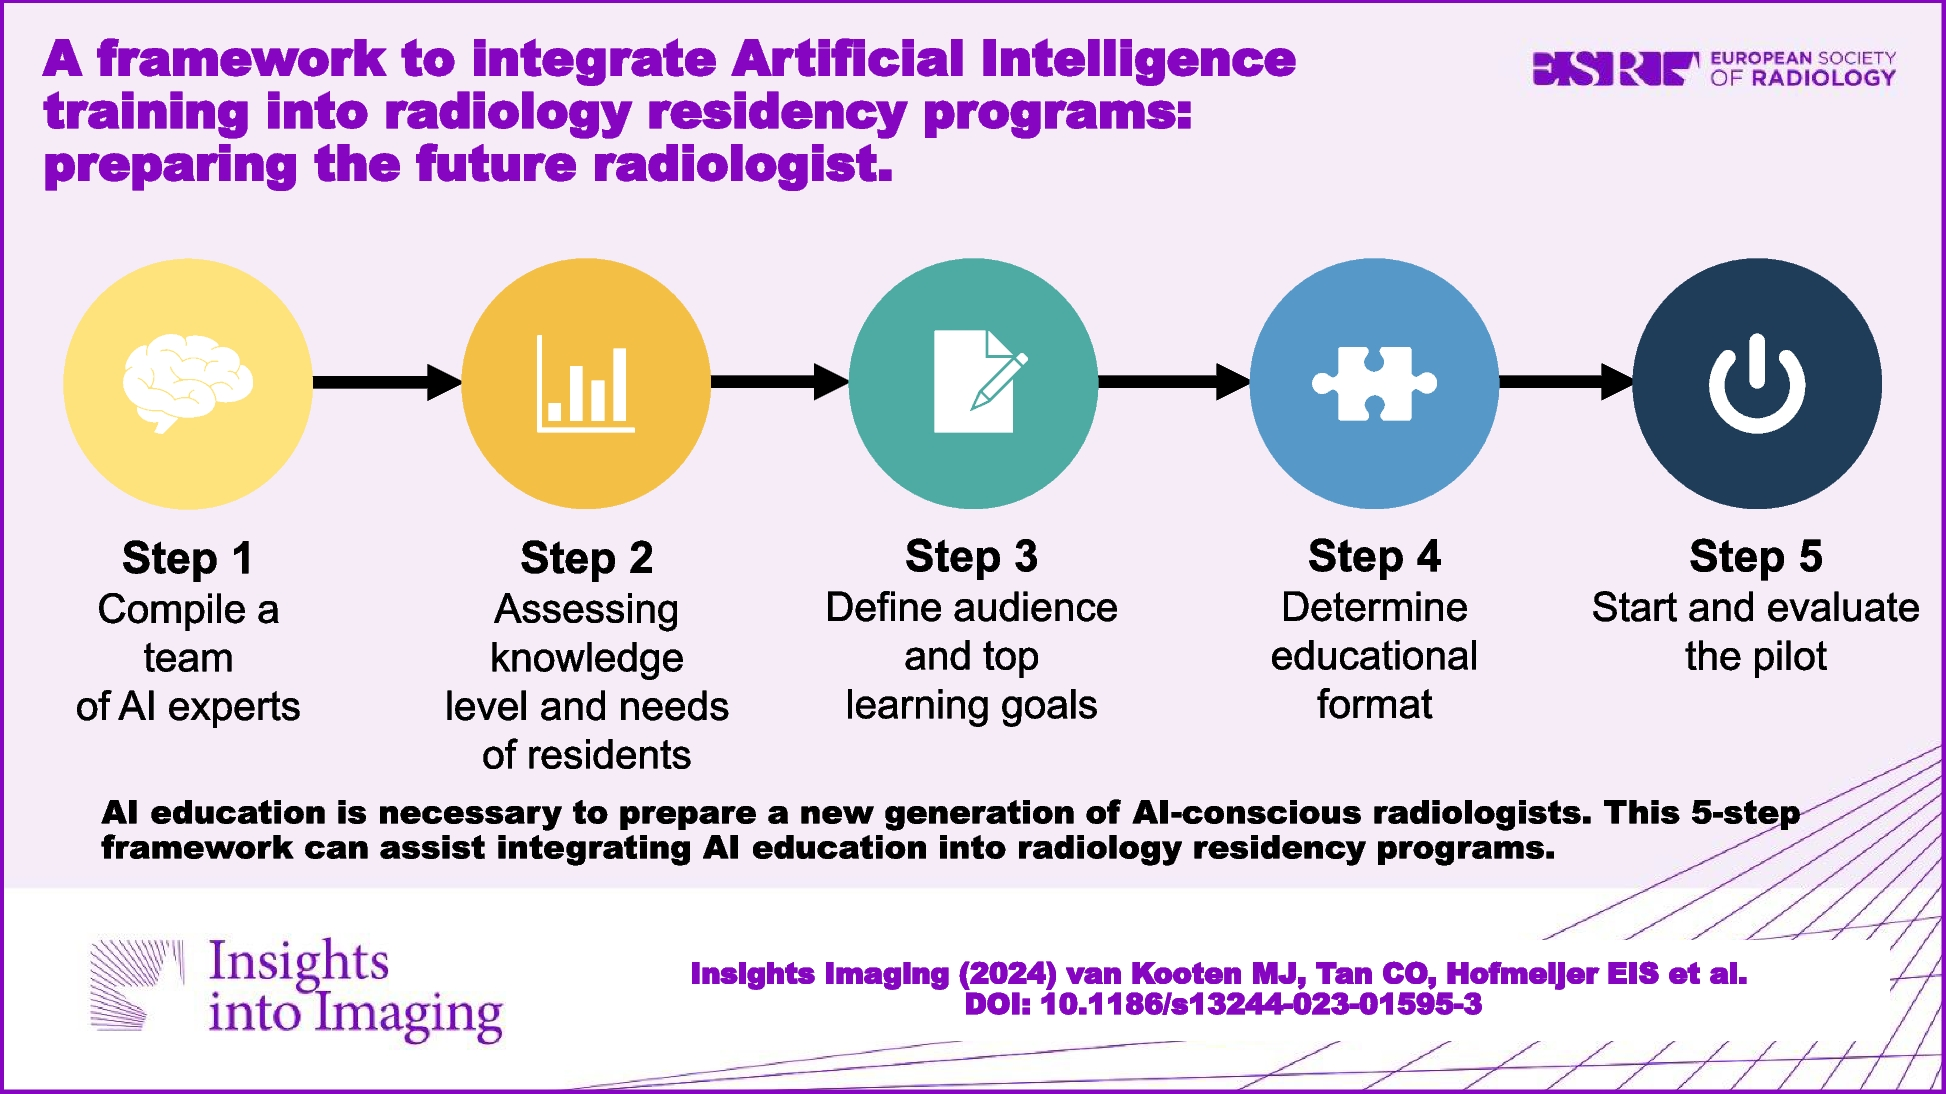 A framework to integrate artificial intelligence training into radiology residency programs: preparing the future radiologist